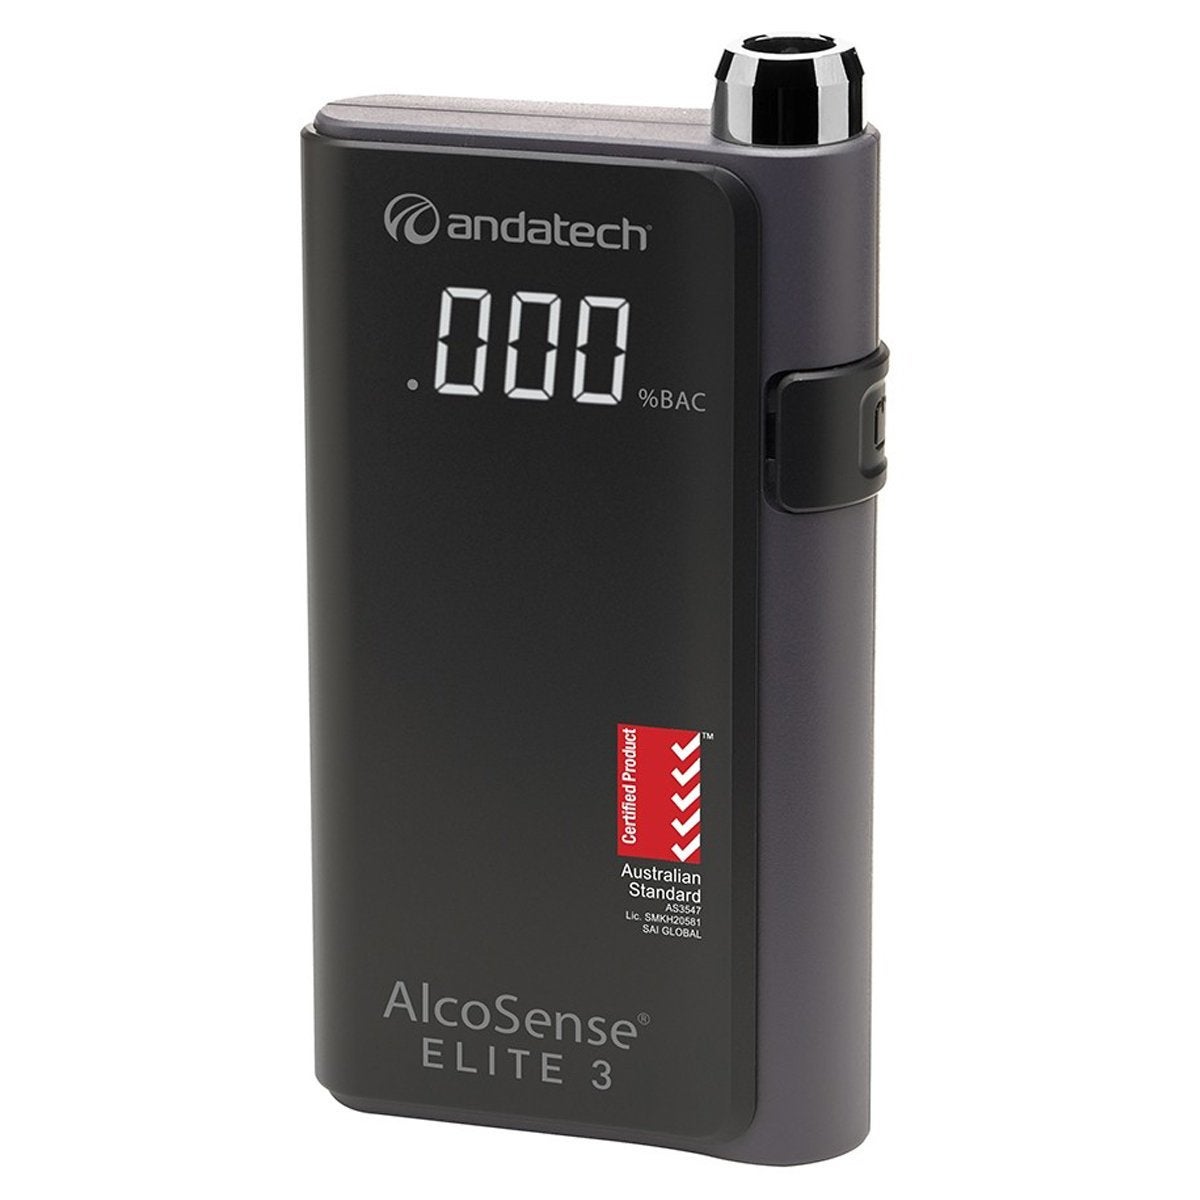 Image of Andatech AlcoSense ALS-ELITE3 Elite 3 Fuel Cell Personal Breathalyser